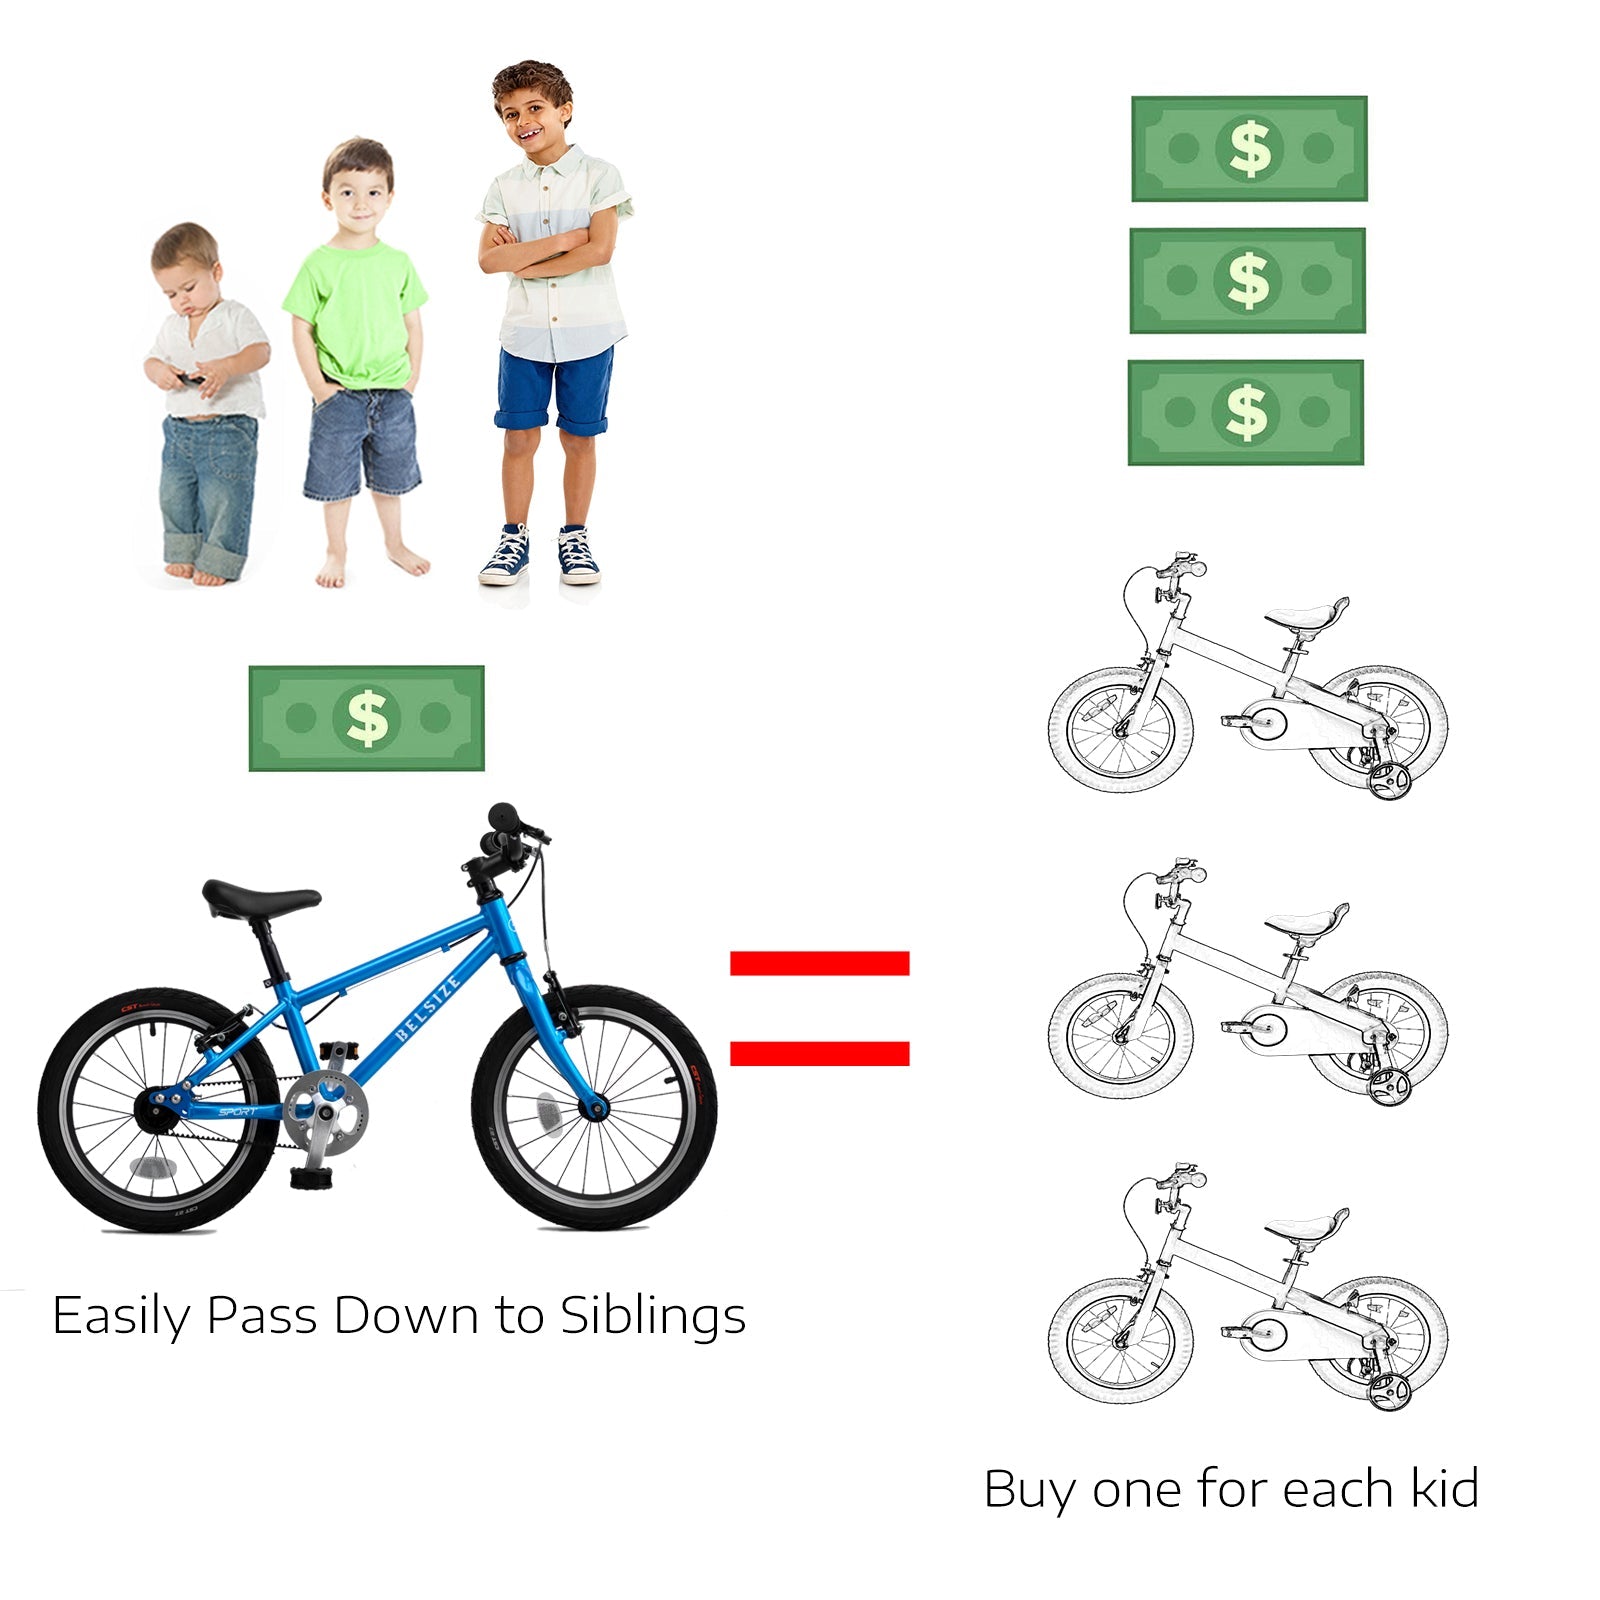 16-inch Sports Belt-Driven Kids' Bike - Belsize Official Sporting Goods > Outdoor Recreation > Cycling > Bicycles